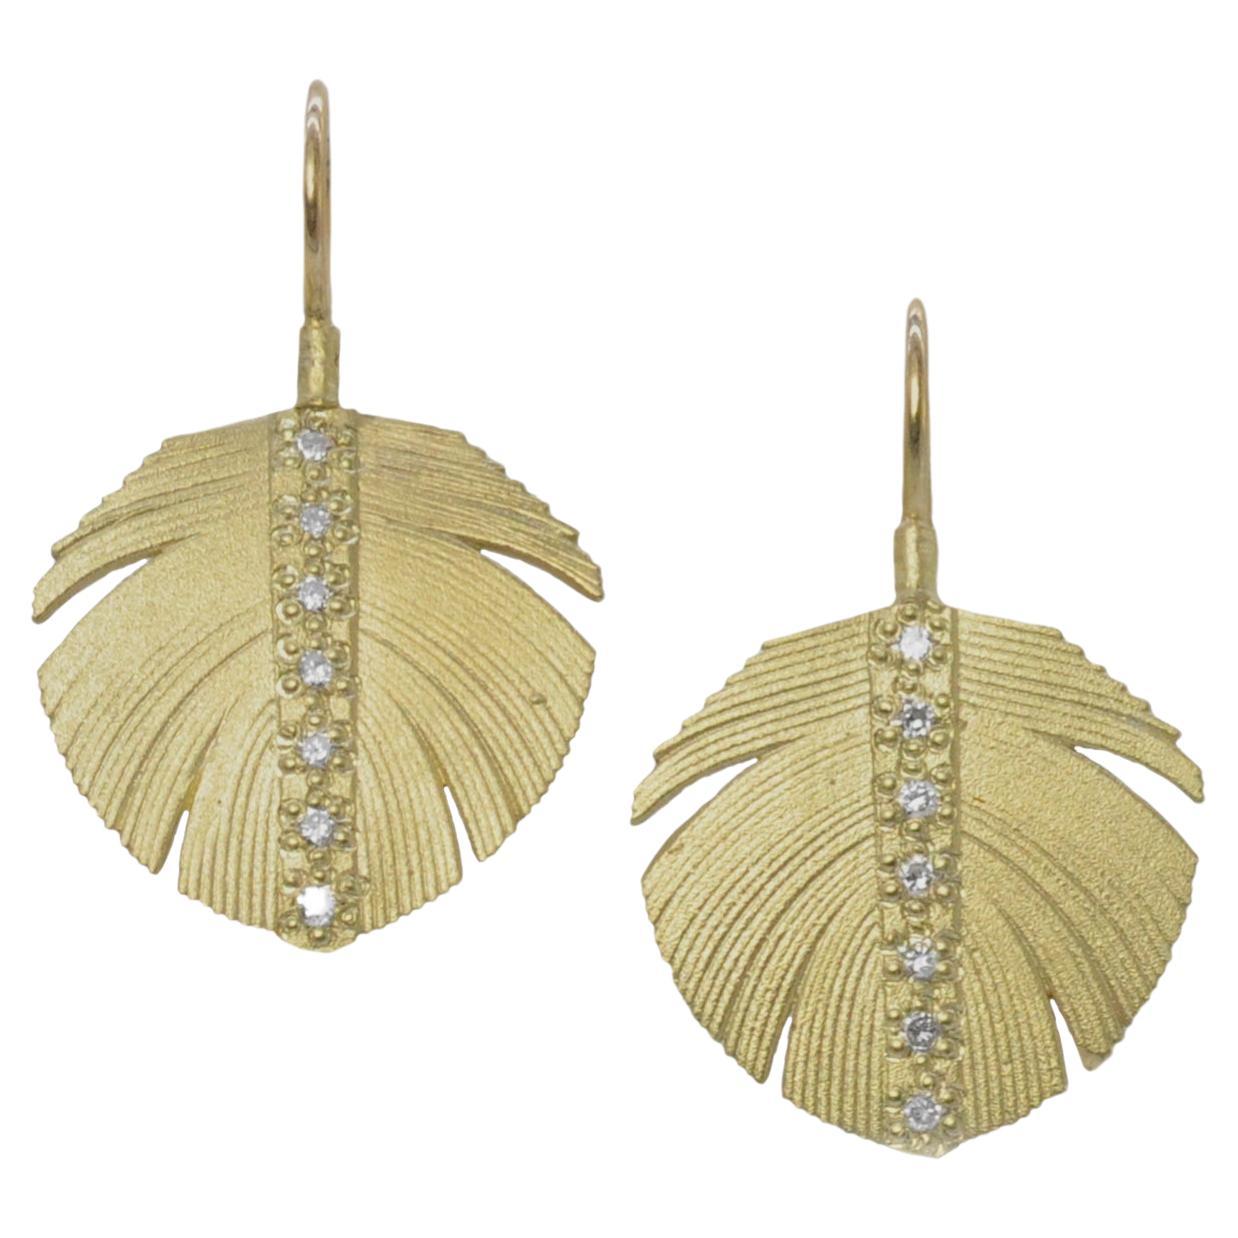 Wide Feather Earrings with Pave Set Diamond Channels, 18k Yellow Gold